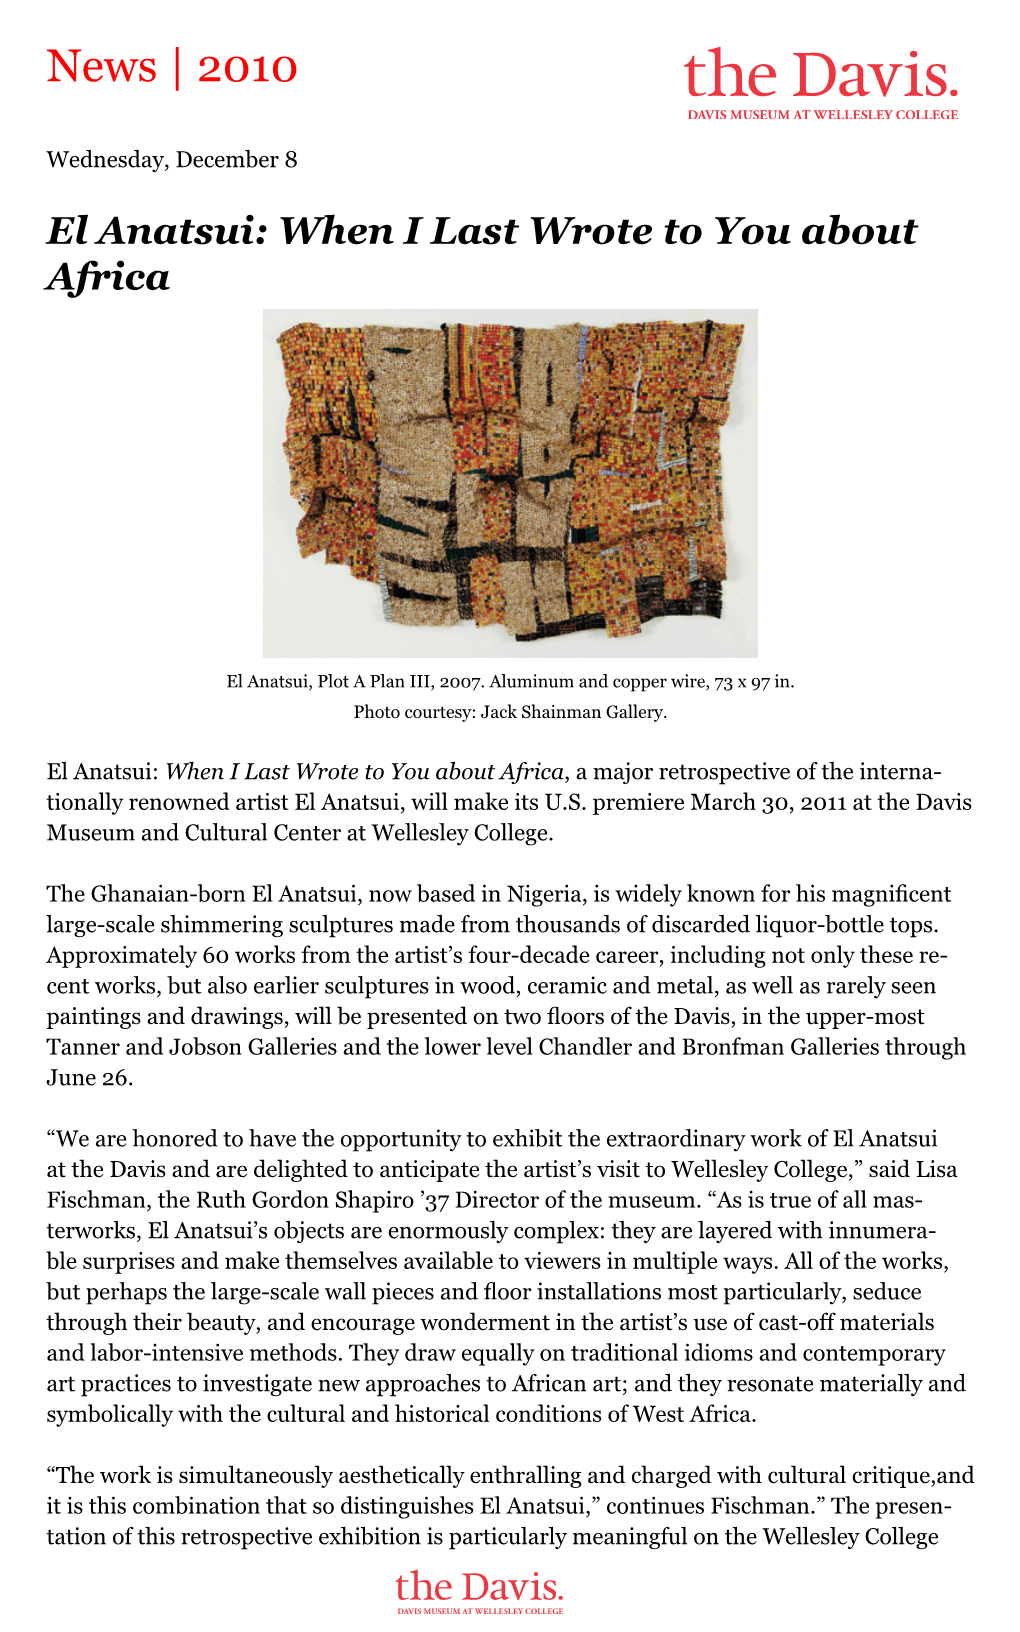 El Anatsui: When I Last Wrote to You About Africa